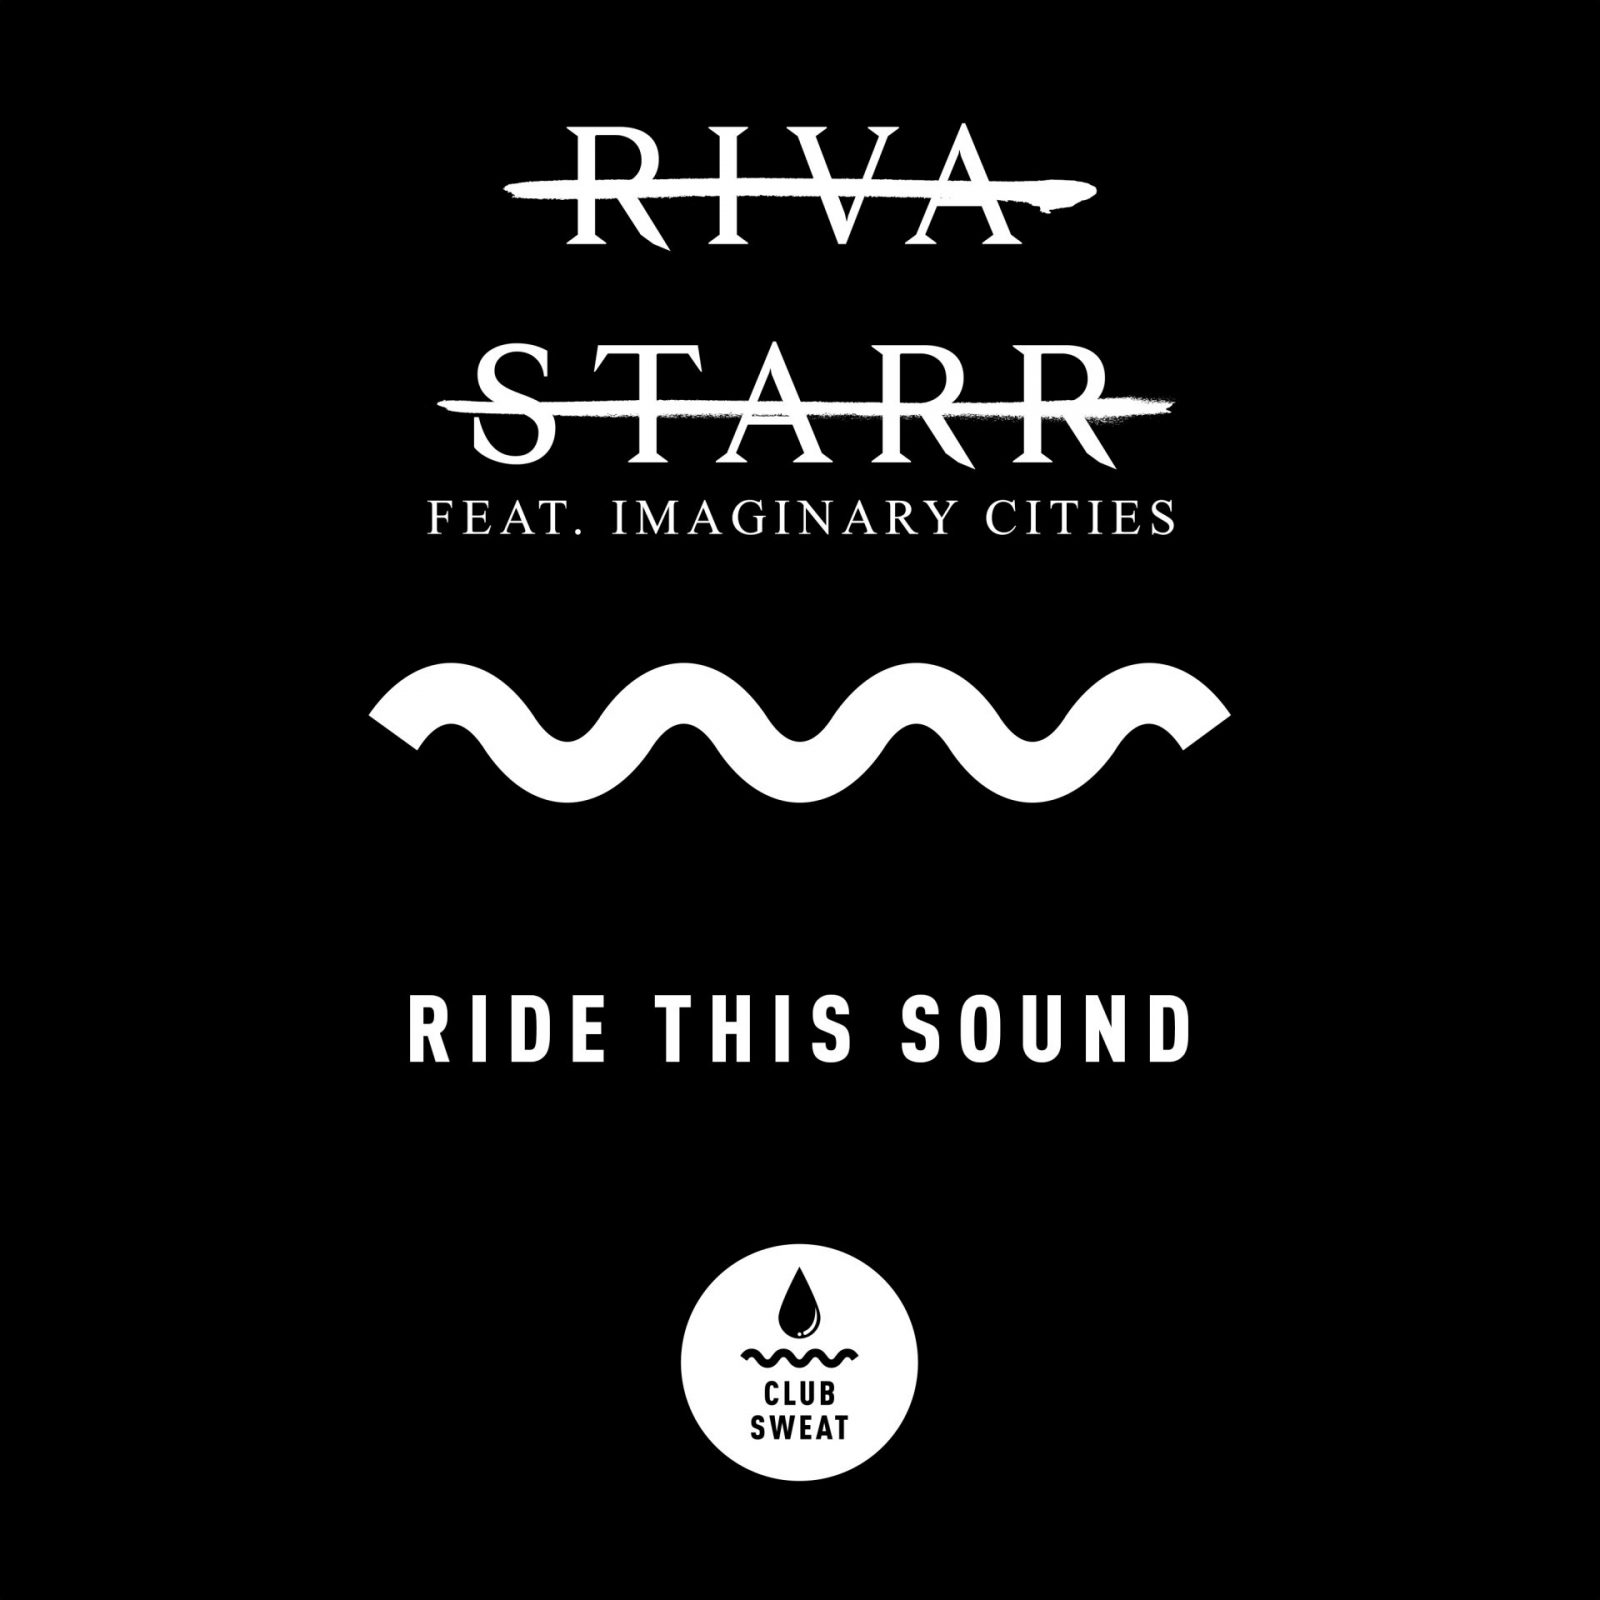 RIVA STARR FEAT. IMAGINARY CITIES – RIDE THIS SOUND